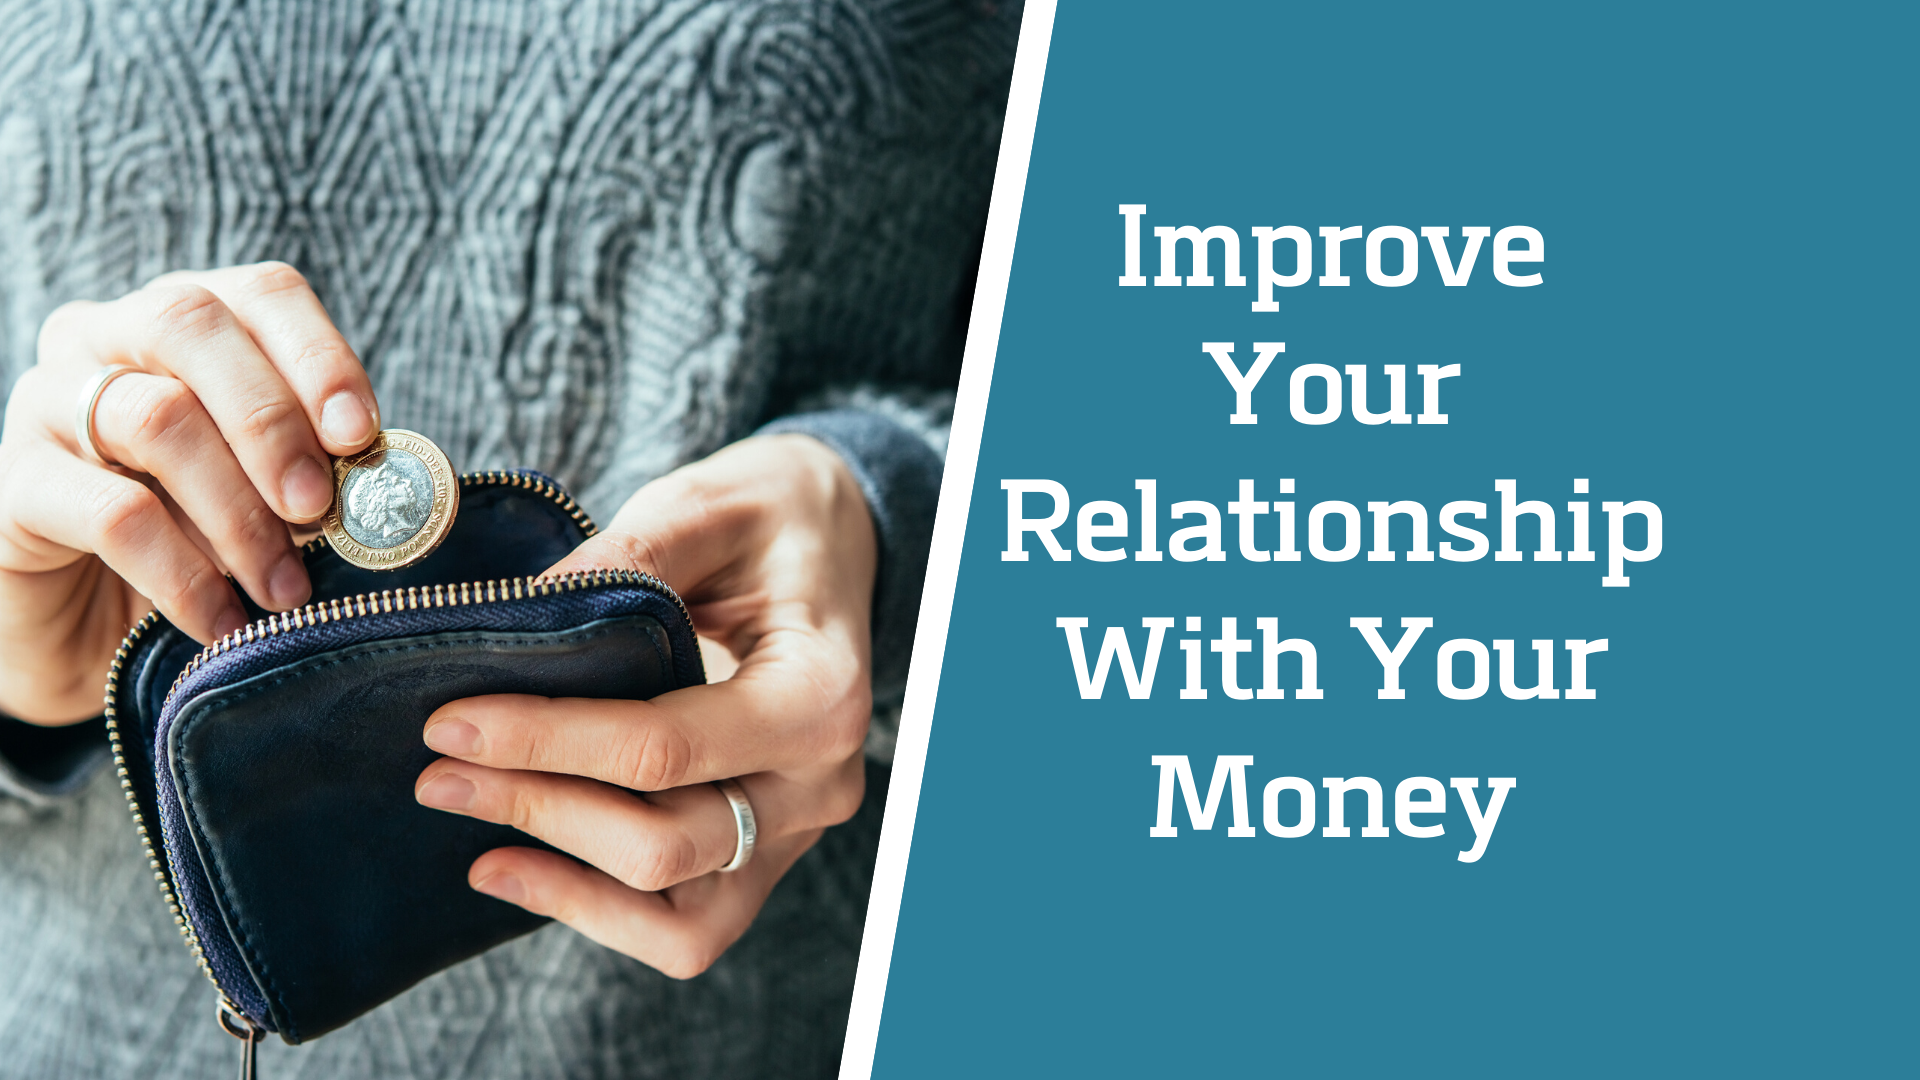 Improve Your Relationship with Money by Answering These 5 Questions